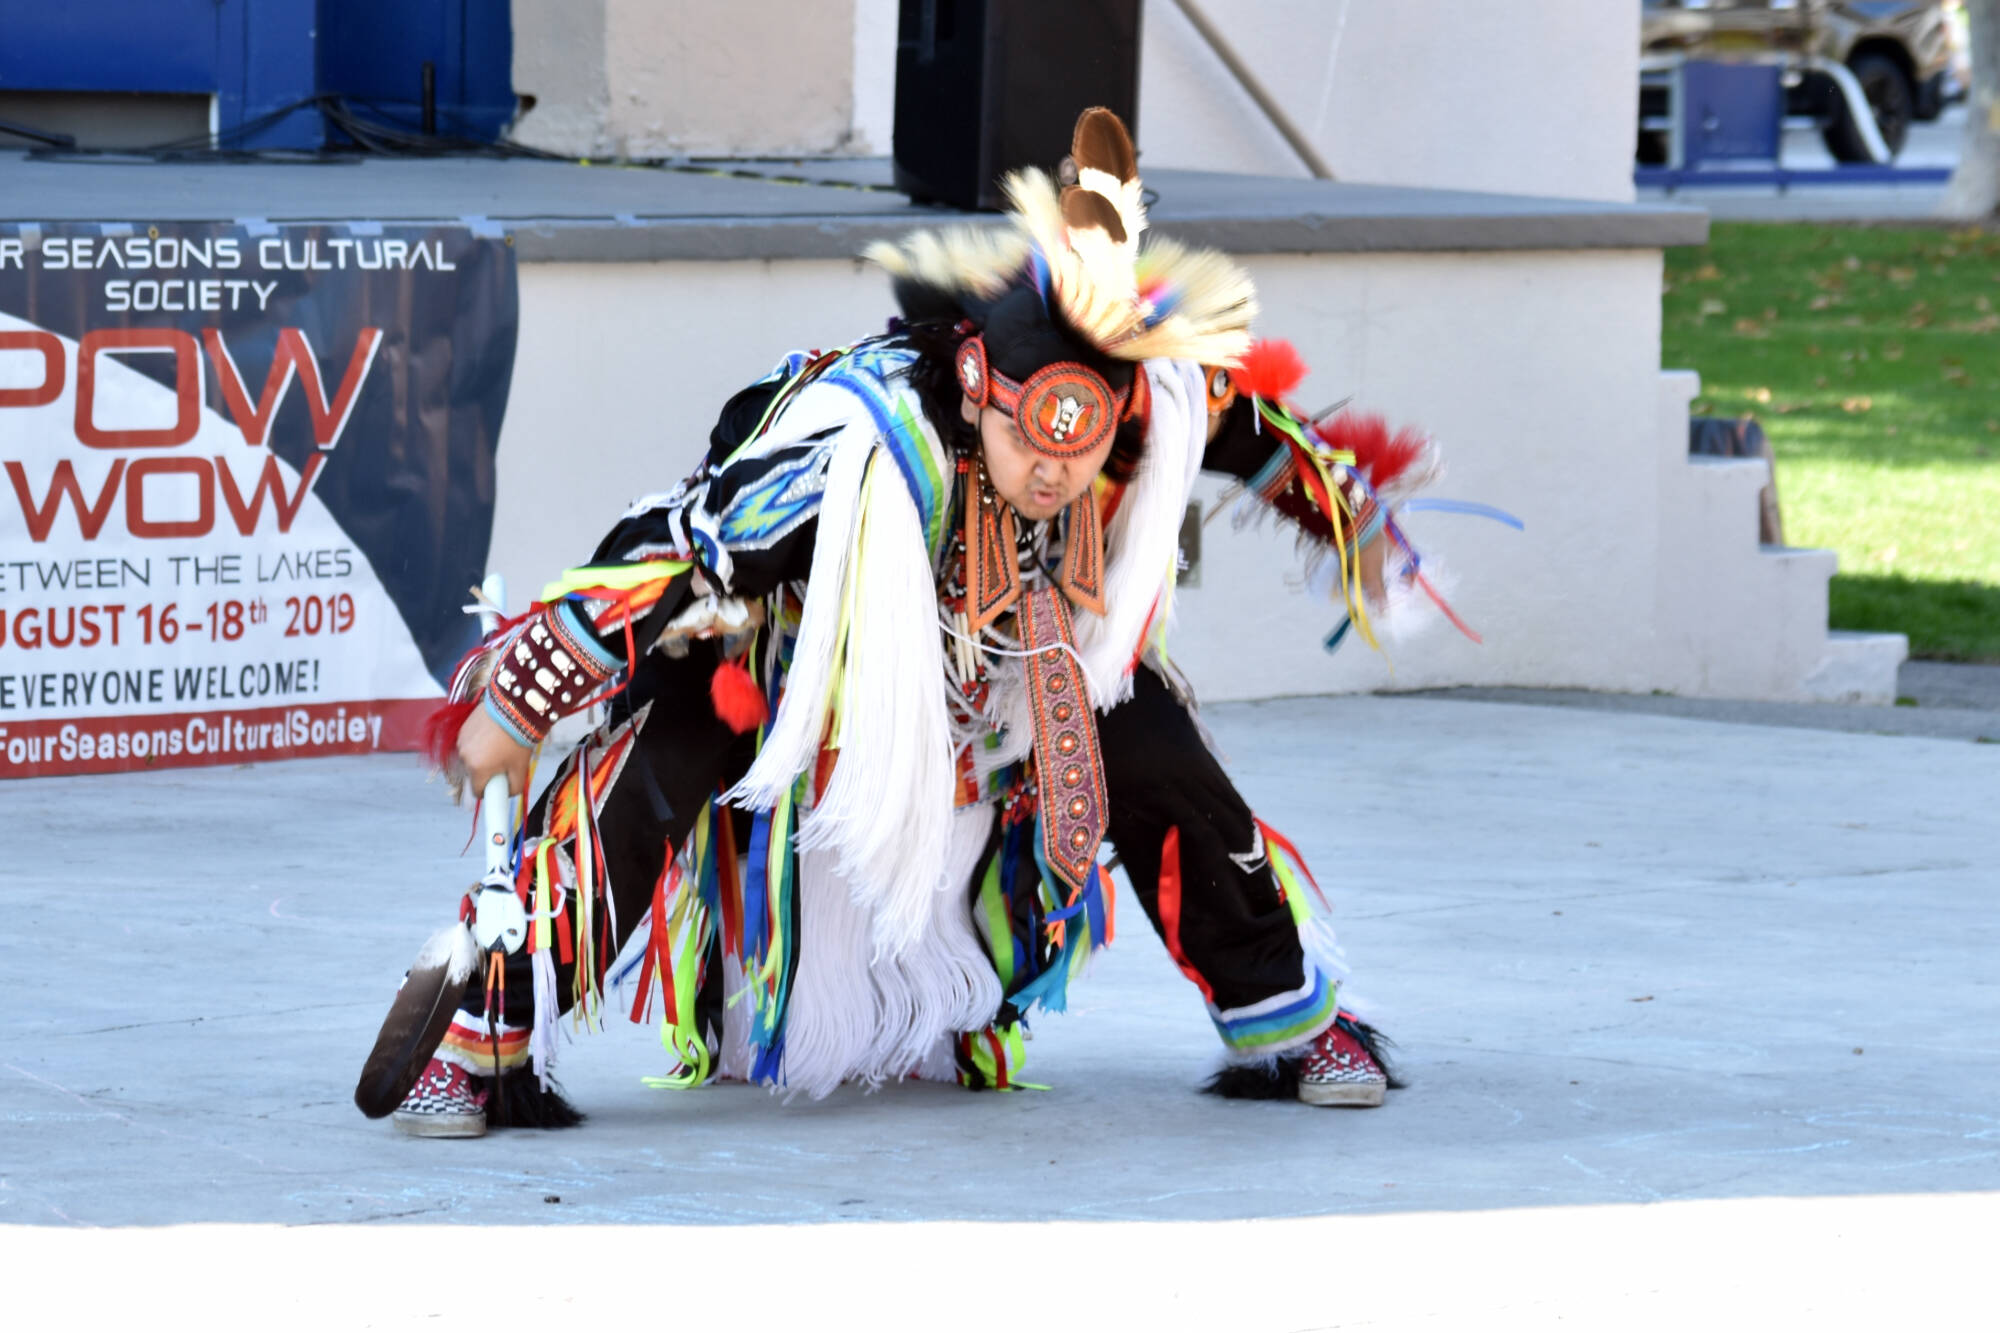 Celebration of Indigenous Culture and Resiliency in Penticton's Gyro Park on the second National Day of Truth and Reconciliation. (Brennan Phillips - Western News)